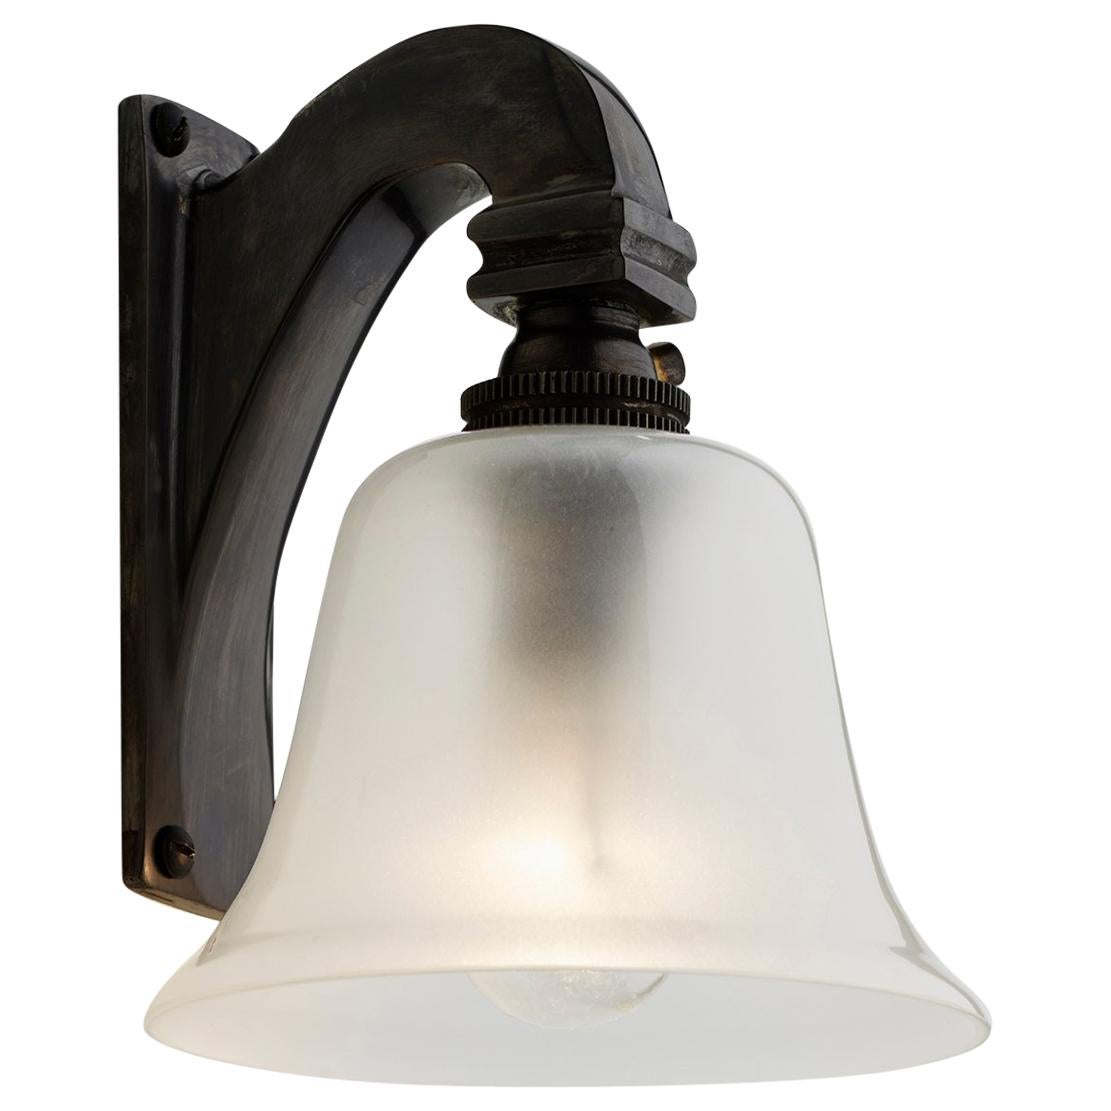 Tekna Bell Light 12V Wall Sconce in Dark Bronze with Frosted Glass